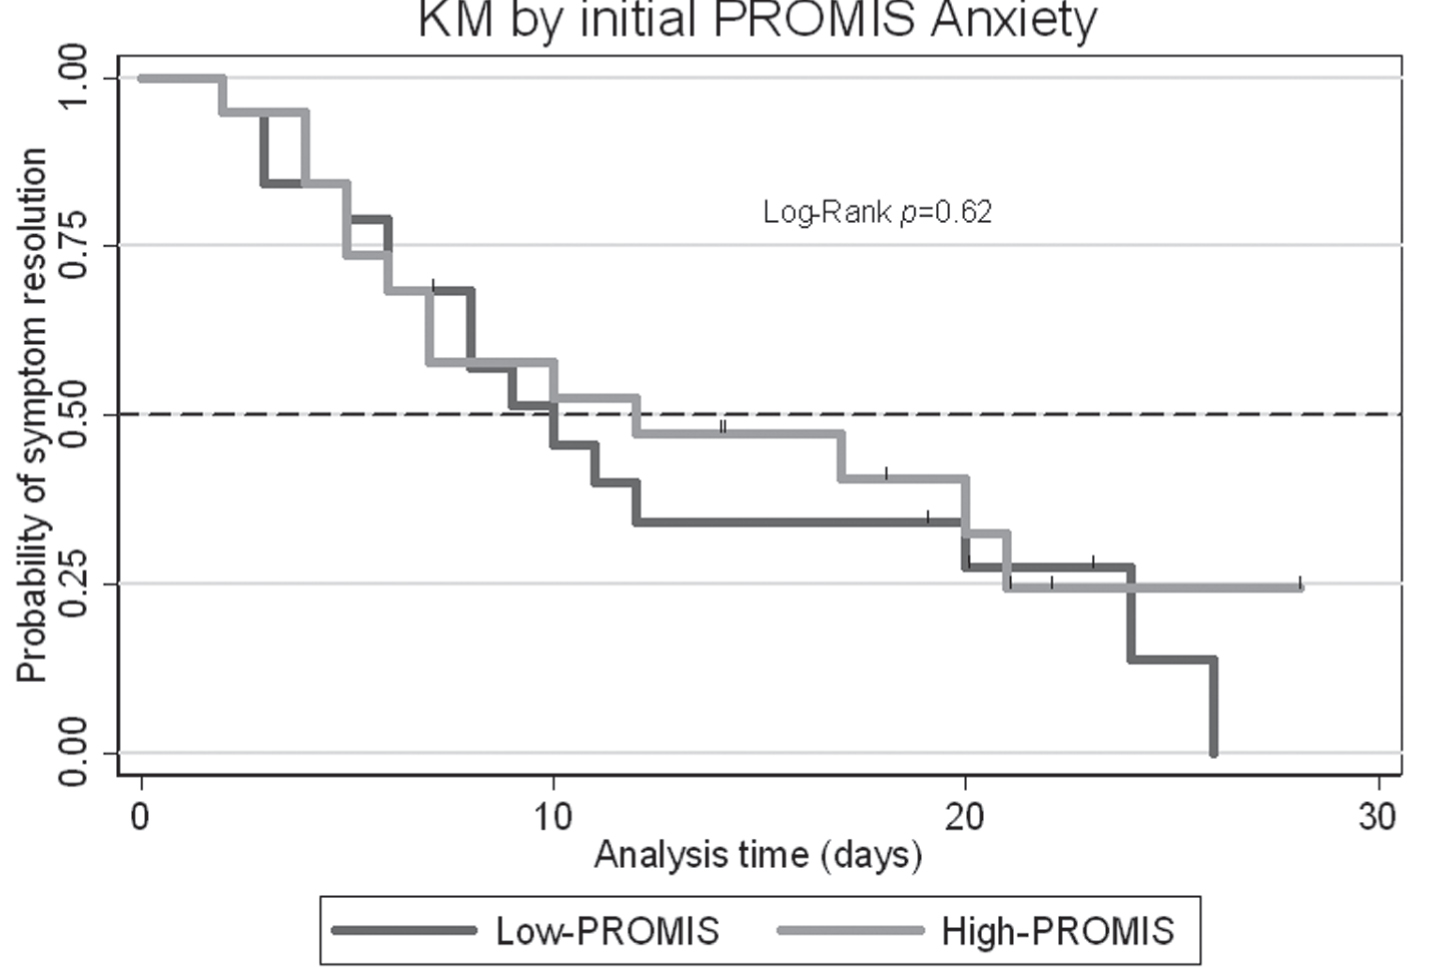 Kaplan Meier plot displaying time from concussion injury to symptom resolution, stratified by PROMIS Anxiety level at the initial visit.